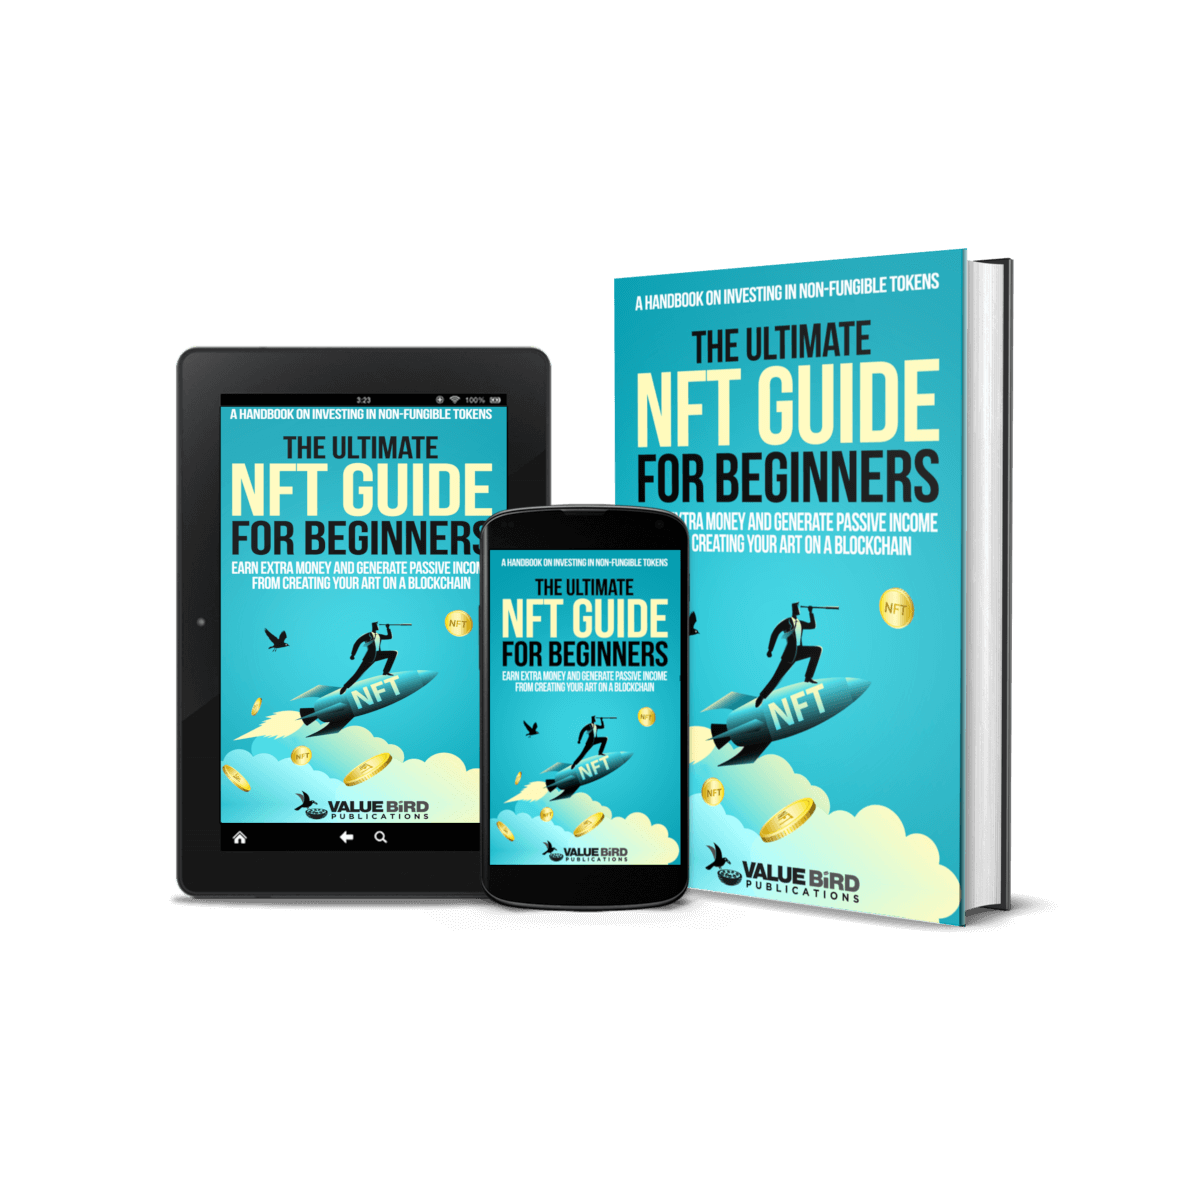 The Ultimate NFT Guide for Beginners